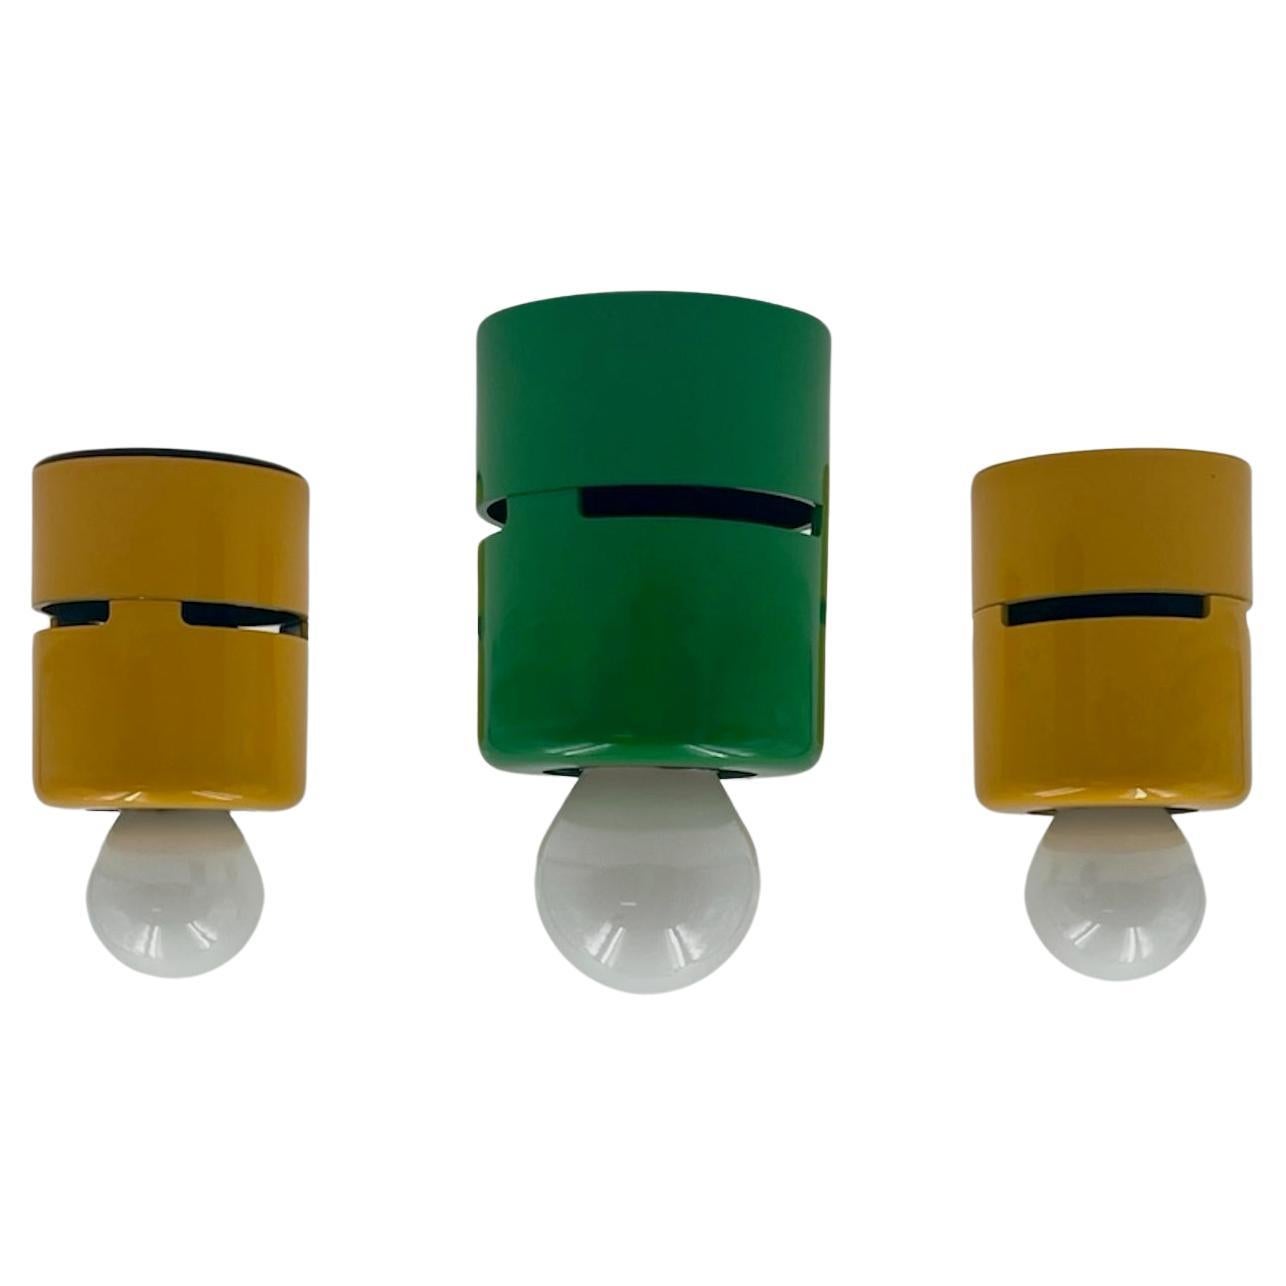 Rare 1980s Stilnovo 'Plafoniera' Wall/Ceiling Melamine Lamps - New Old Stock  For Sale